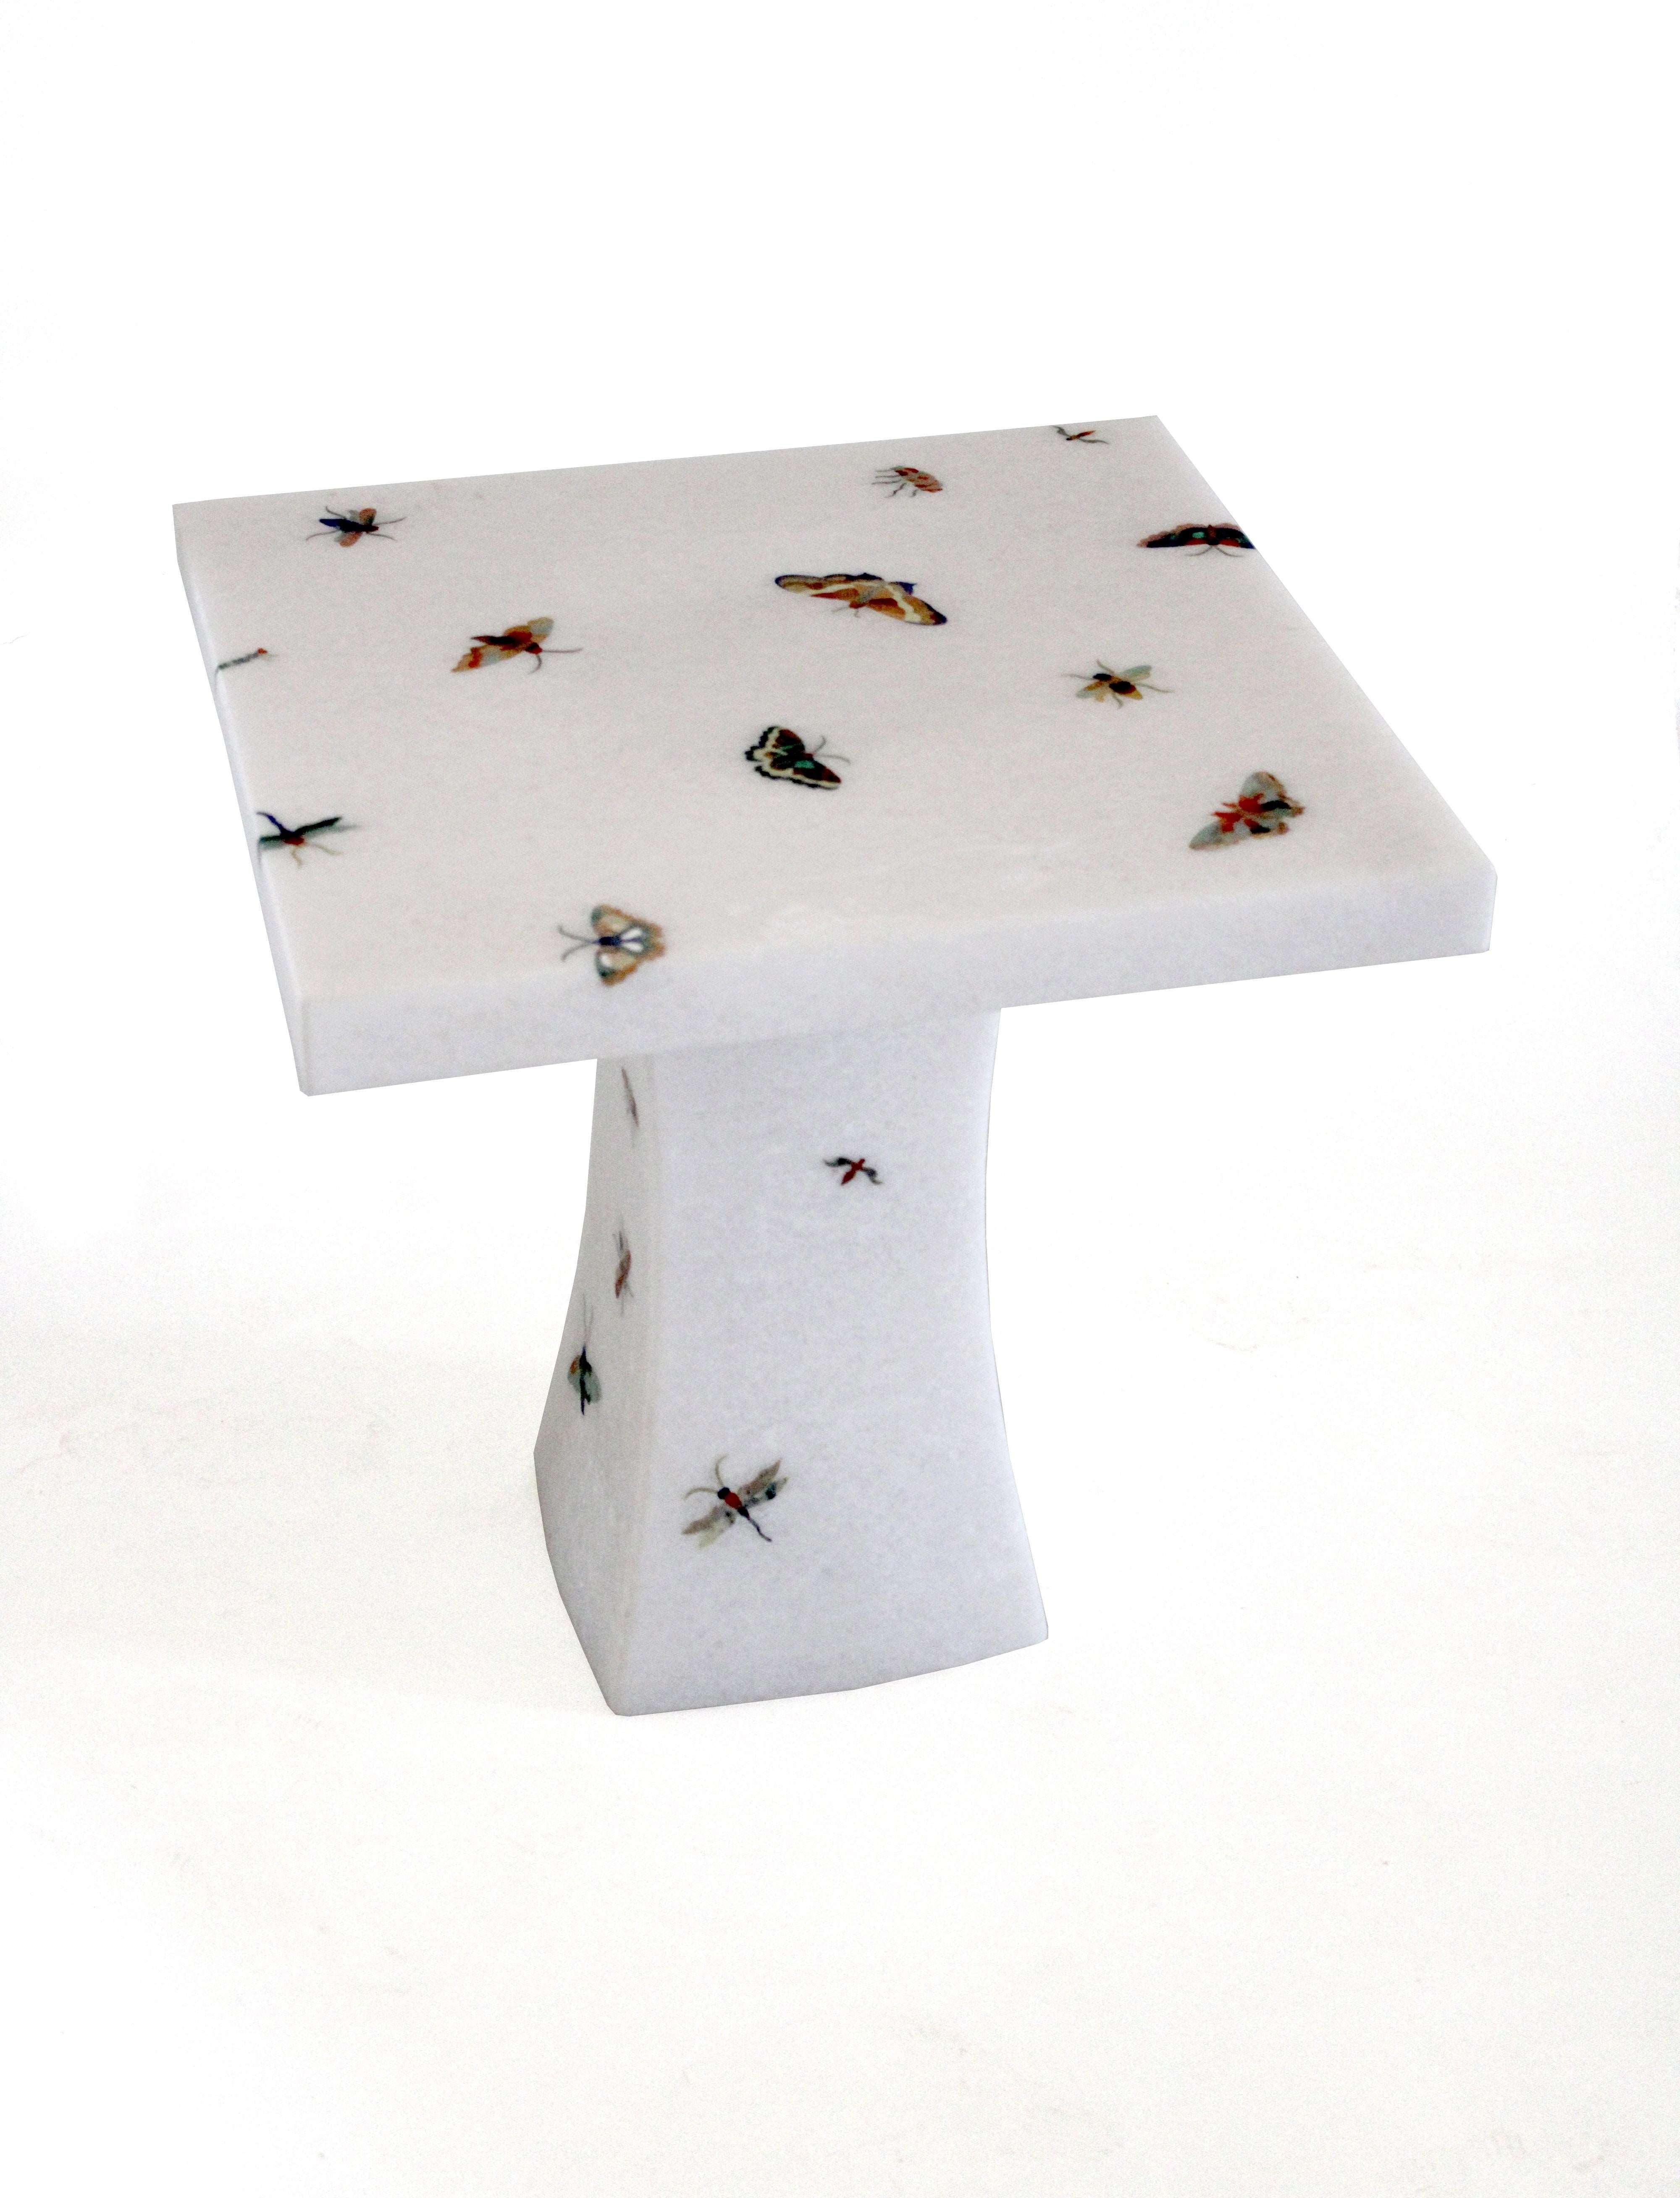 The butterfly table is a part of the Ornamenti collection. Delicately cut pieces of agate, tiger eyes, mother of pearl and other semi precious stones are made into butterfly patterns and carefully inlaid into the base stone by our master craftsmen.